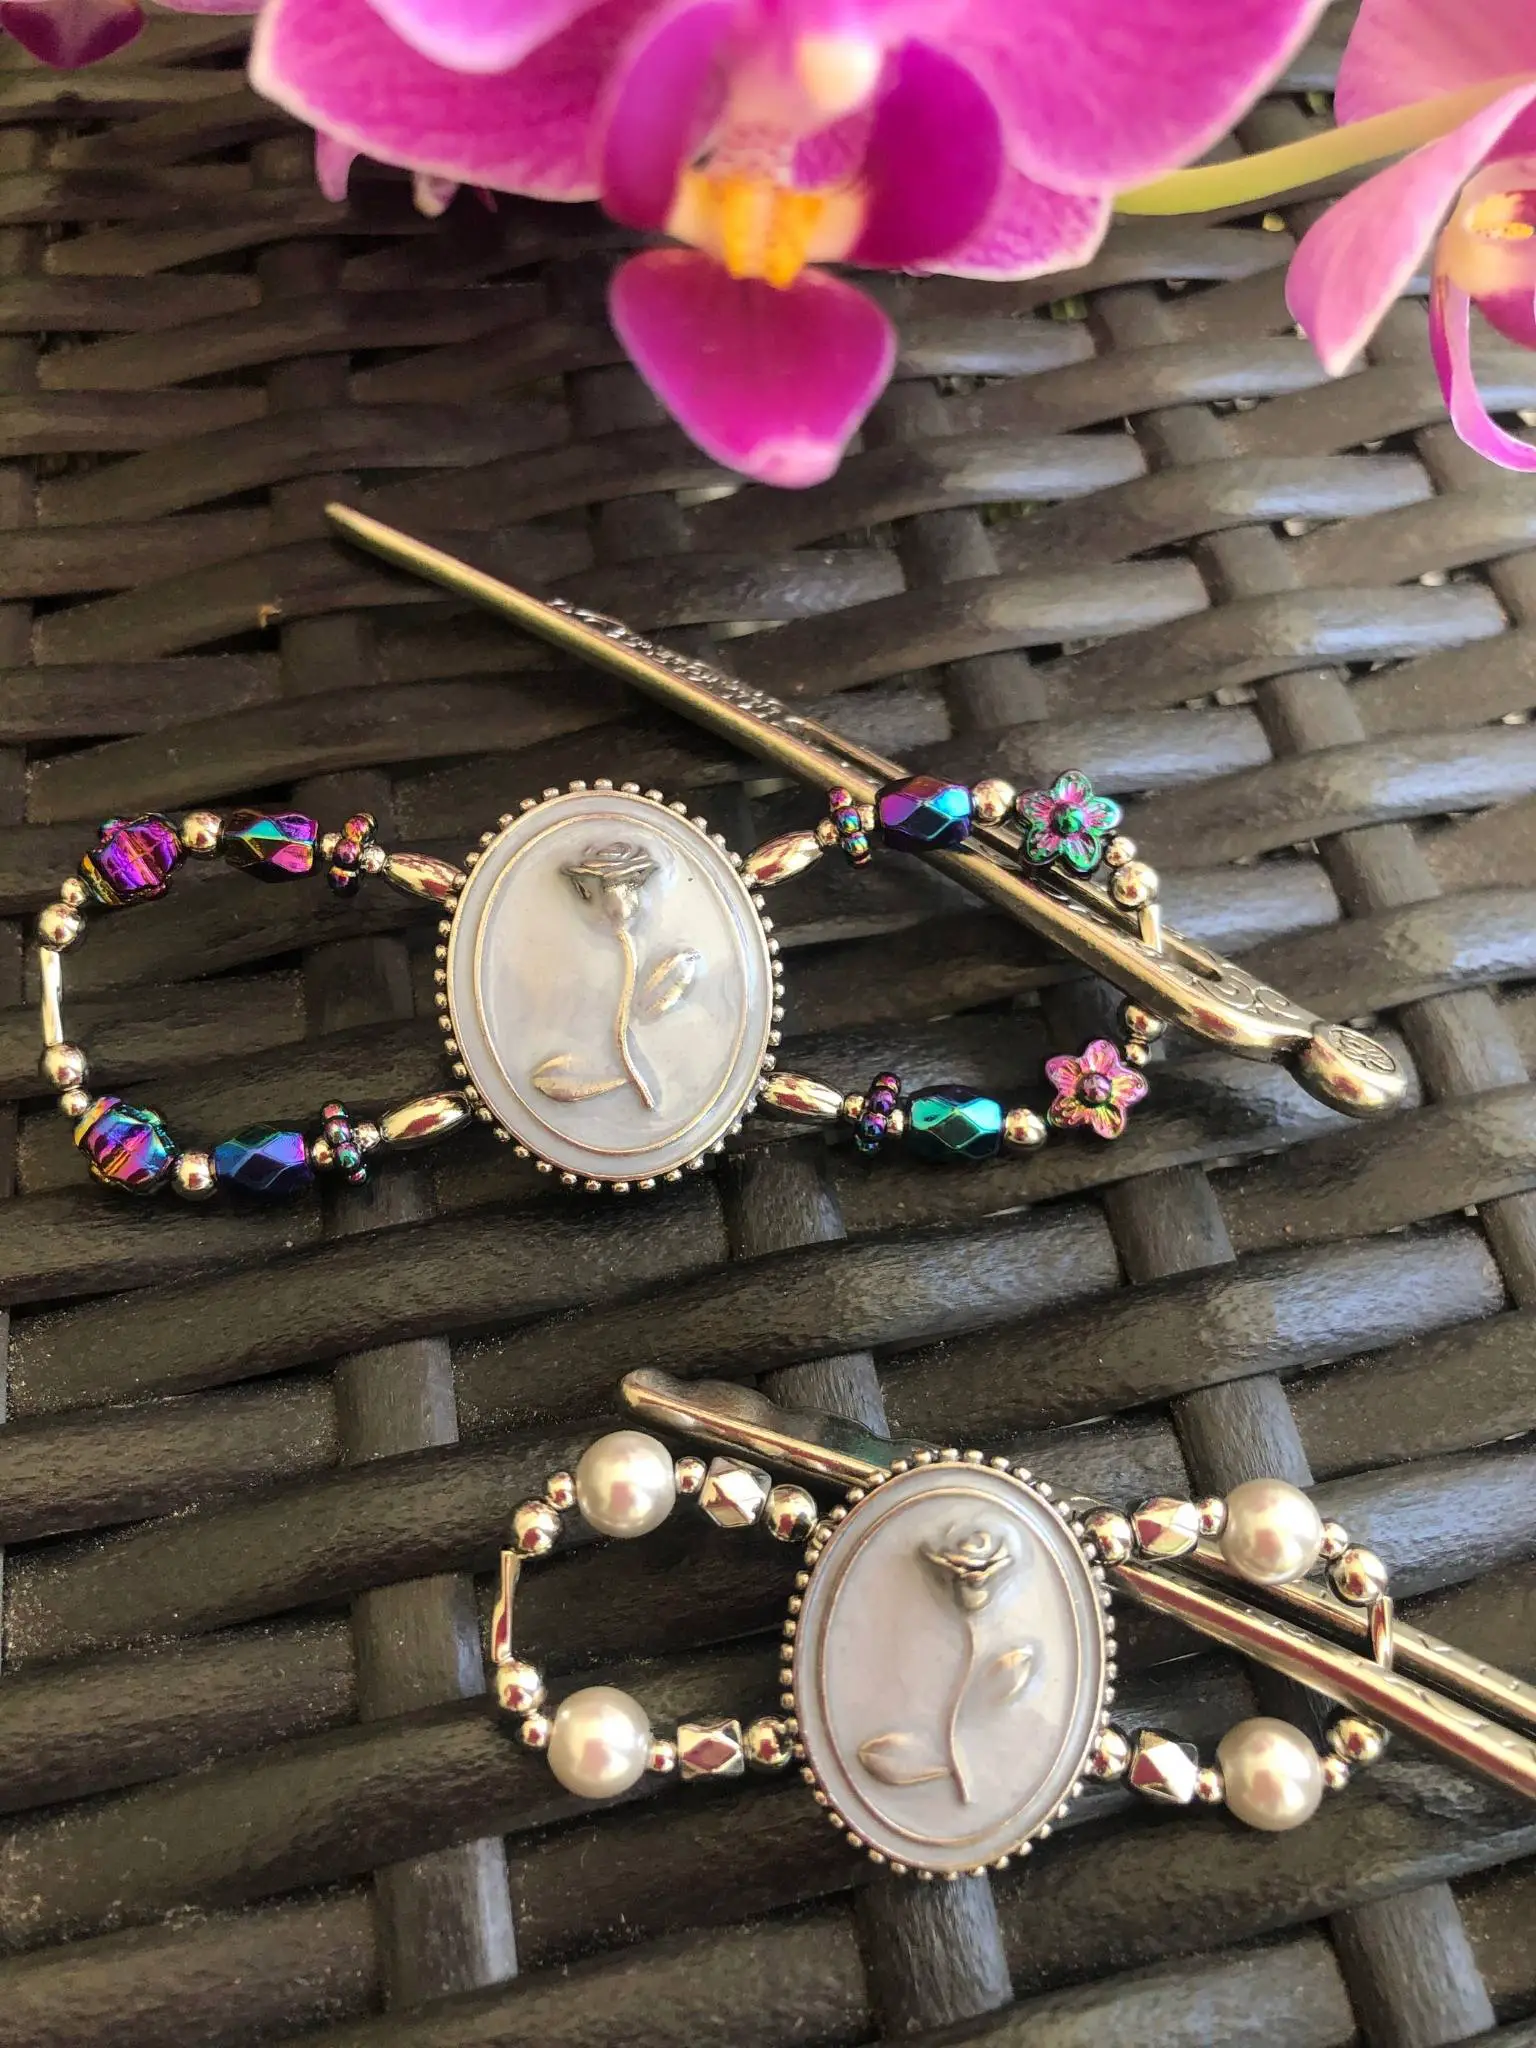 Rose cameo hair clips